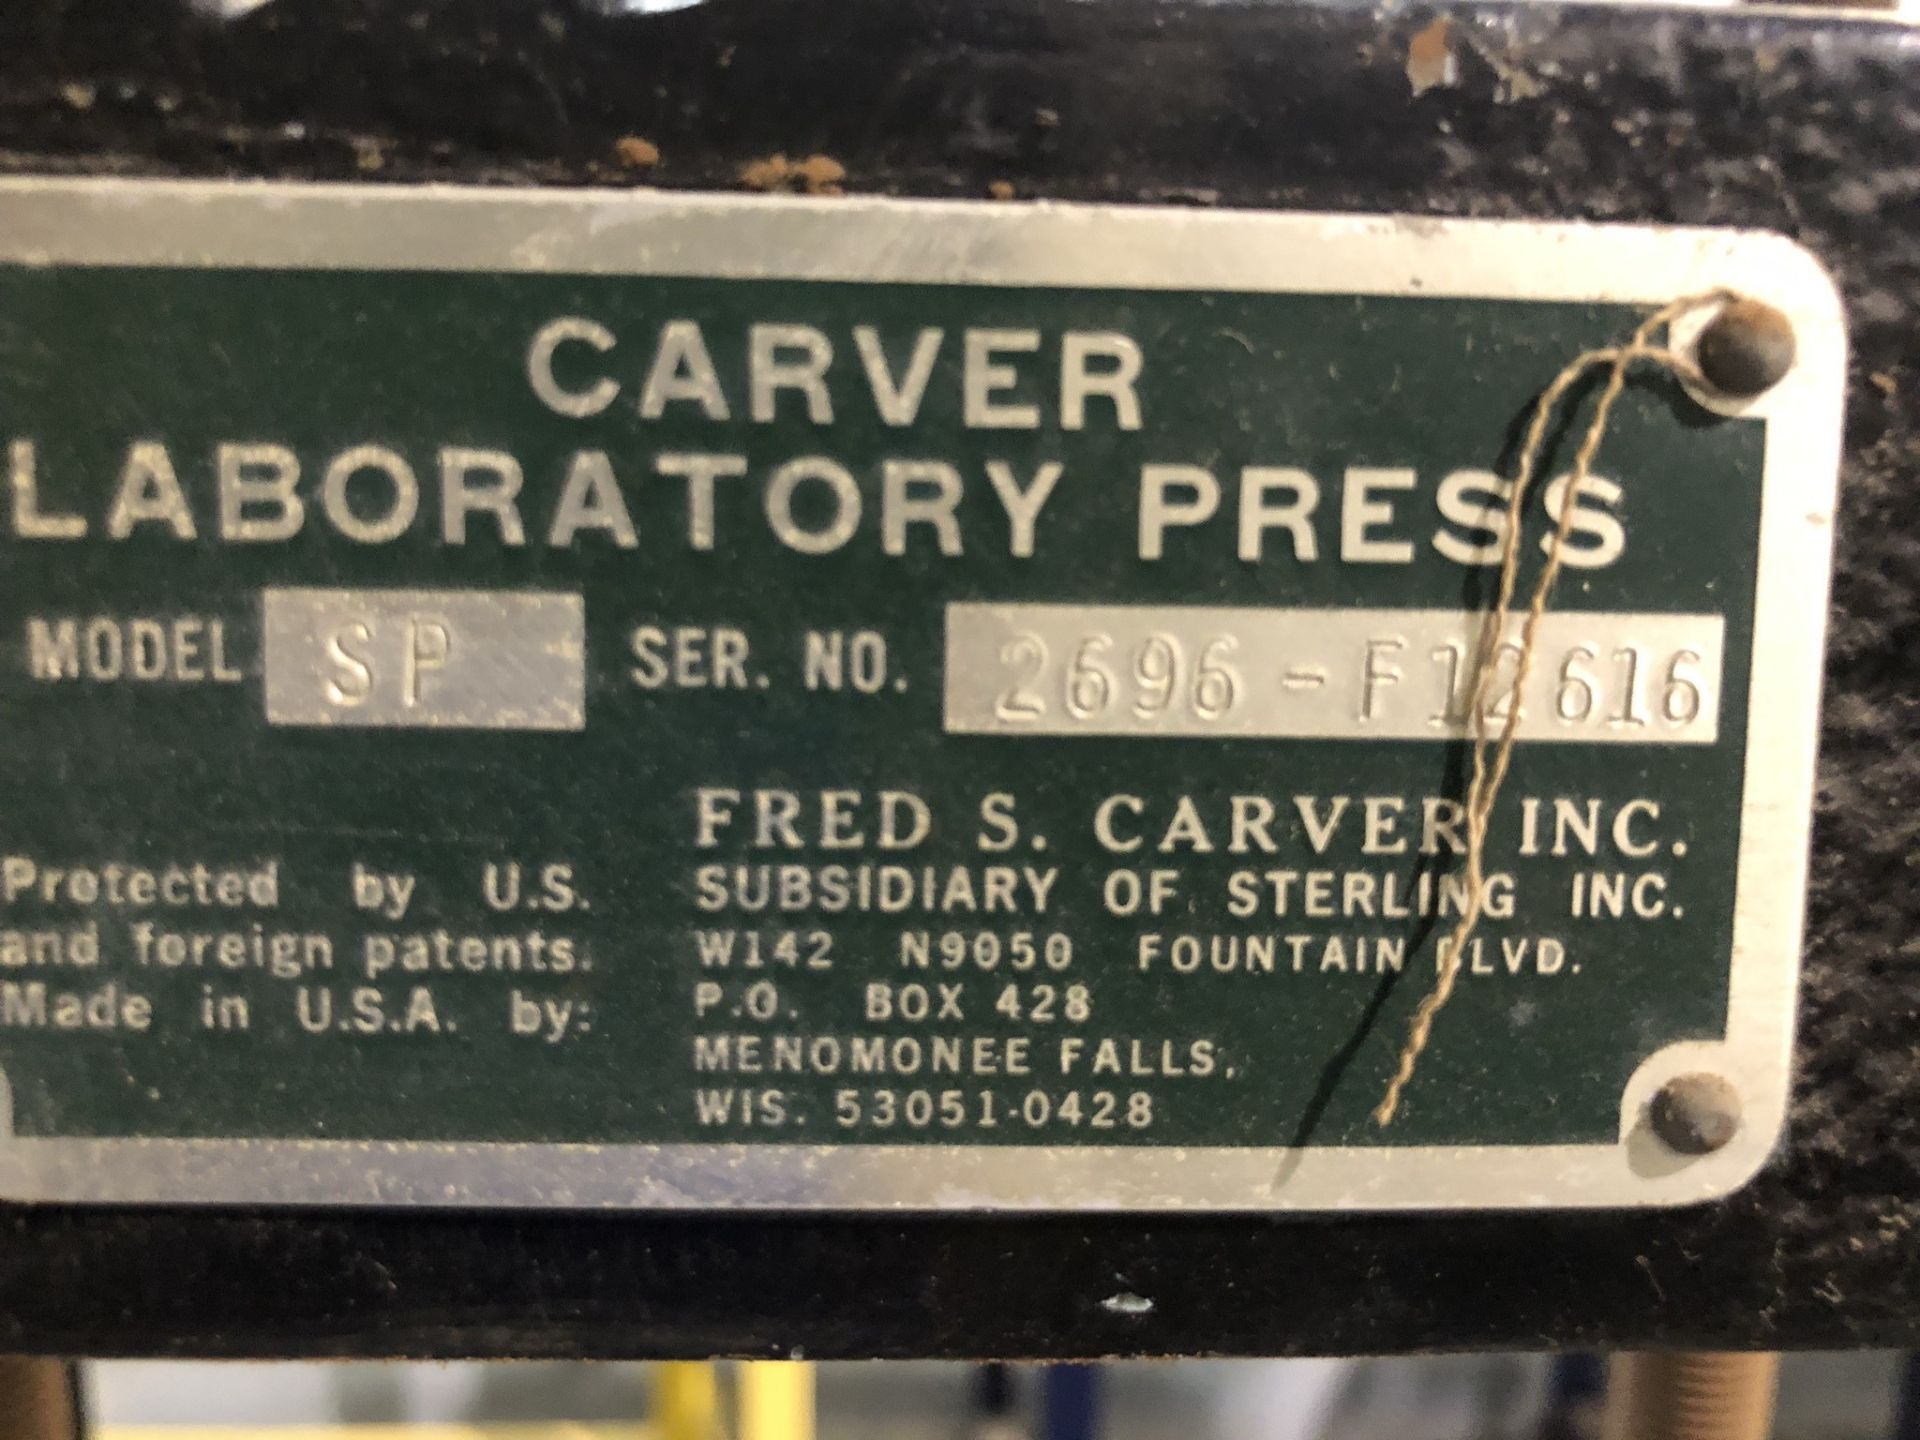 Carver model SP 4 30 ton platen press, Hydraulic load and heater control sytem - Image 3 of 7